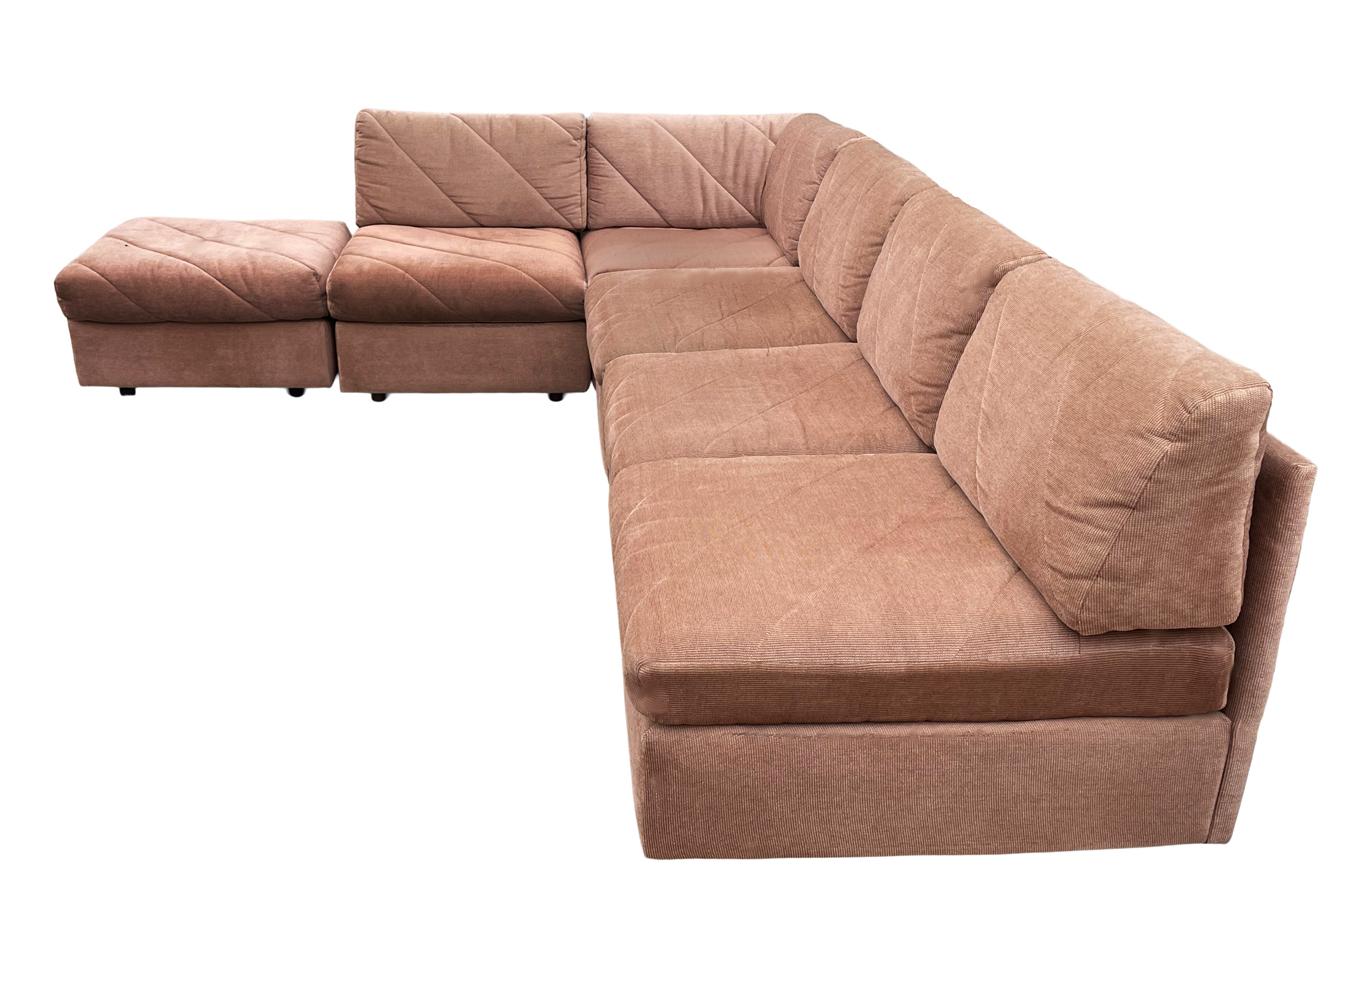 American Six Piece Mid Century Boxy Modern Modular or Sectional L Shaped Sofa For Sale